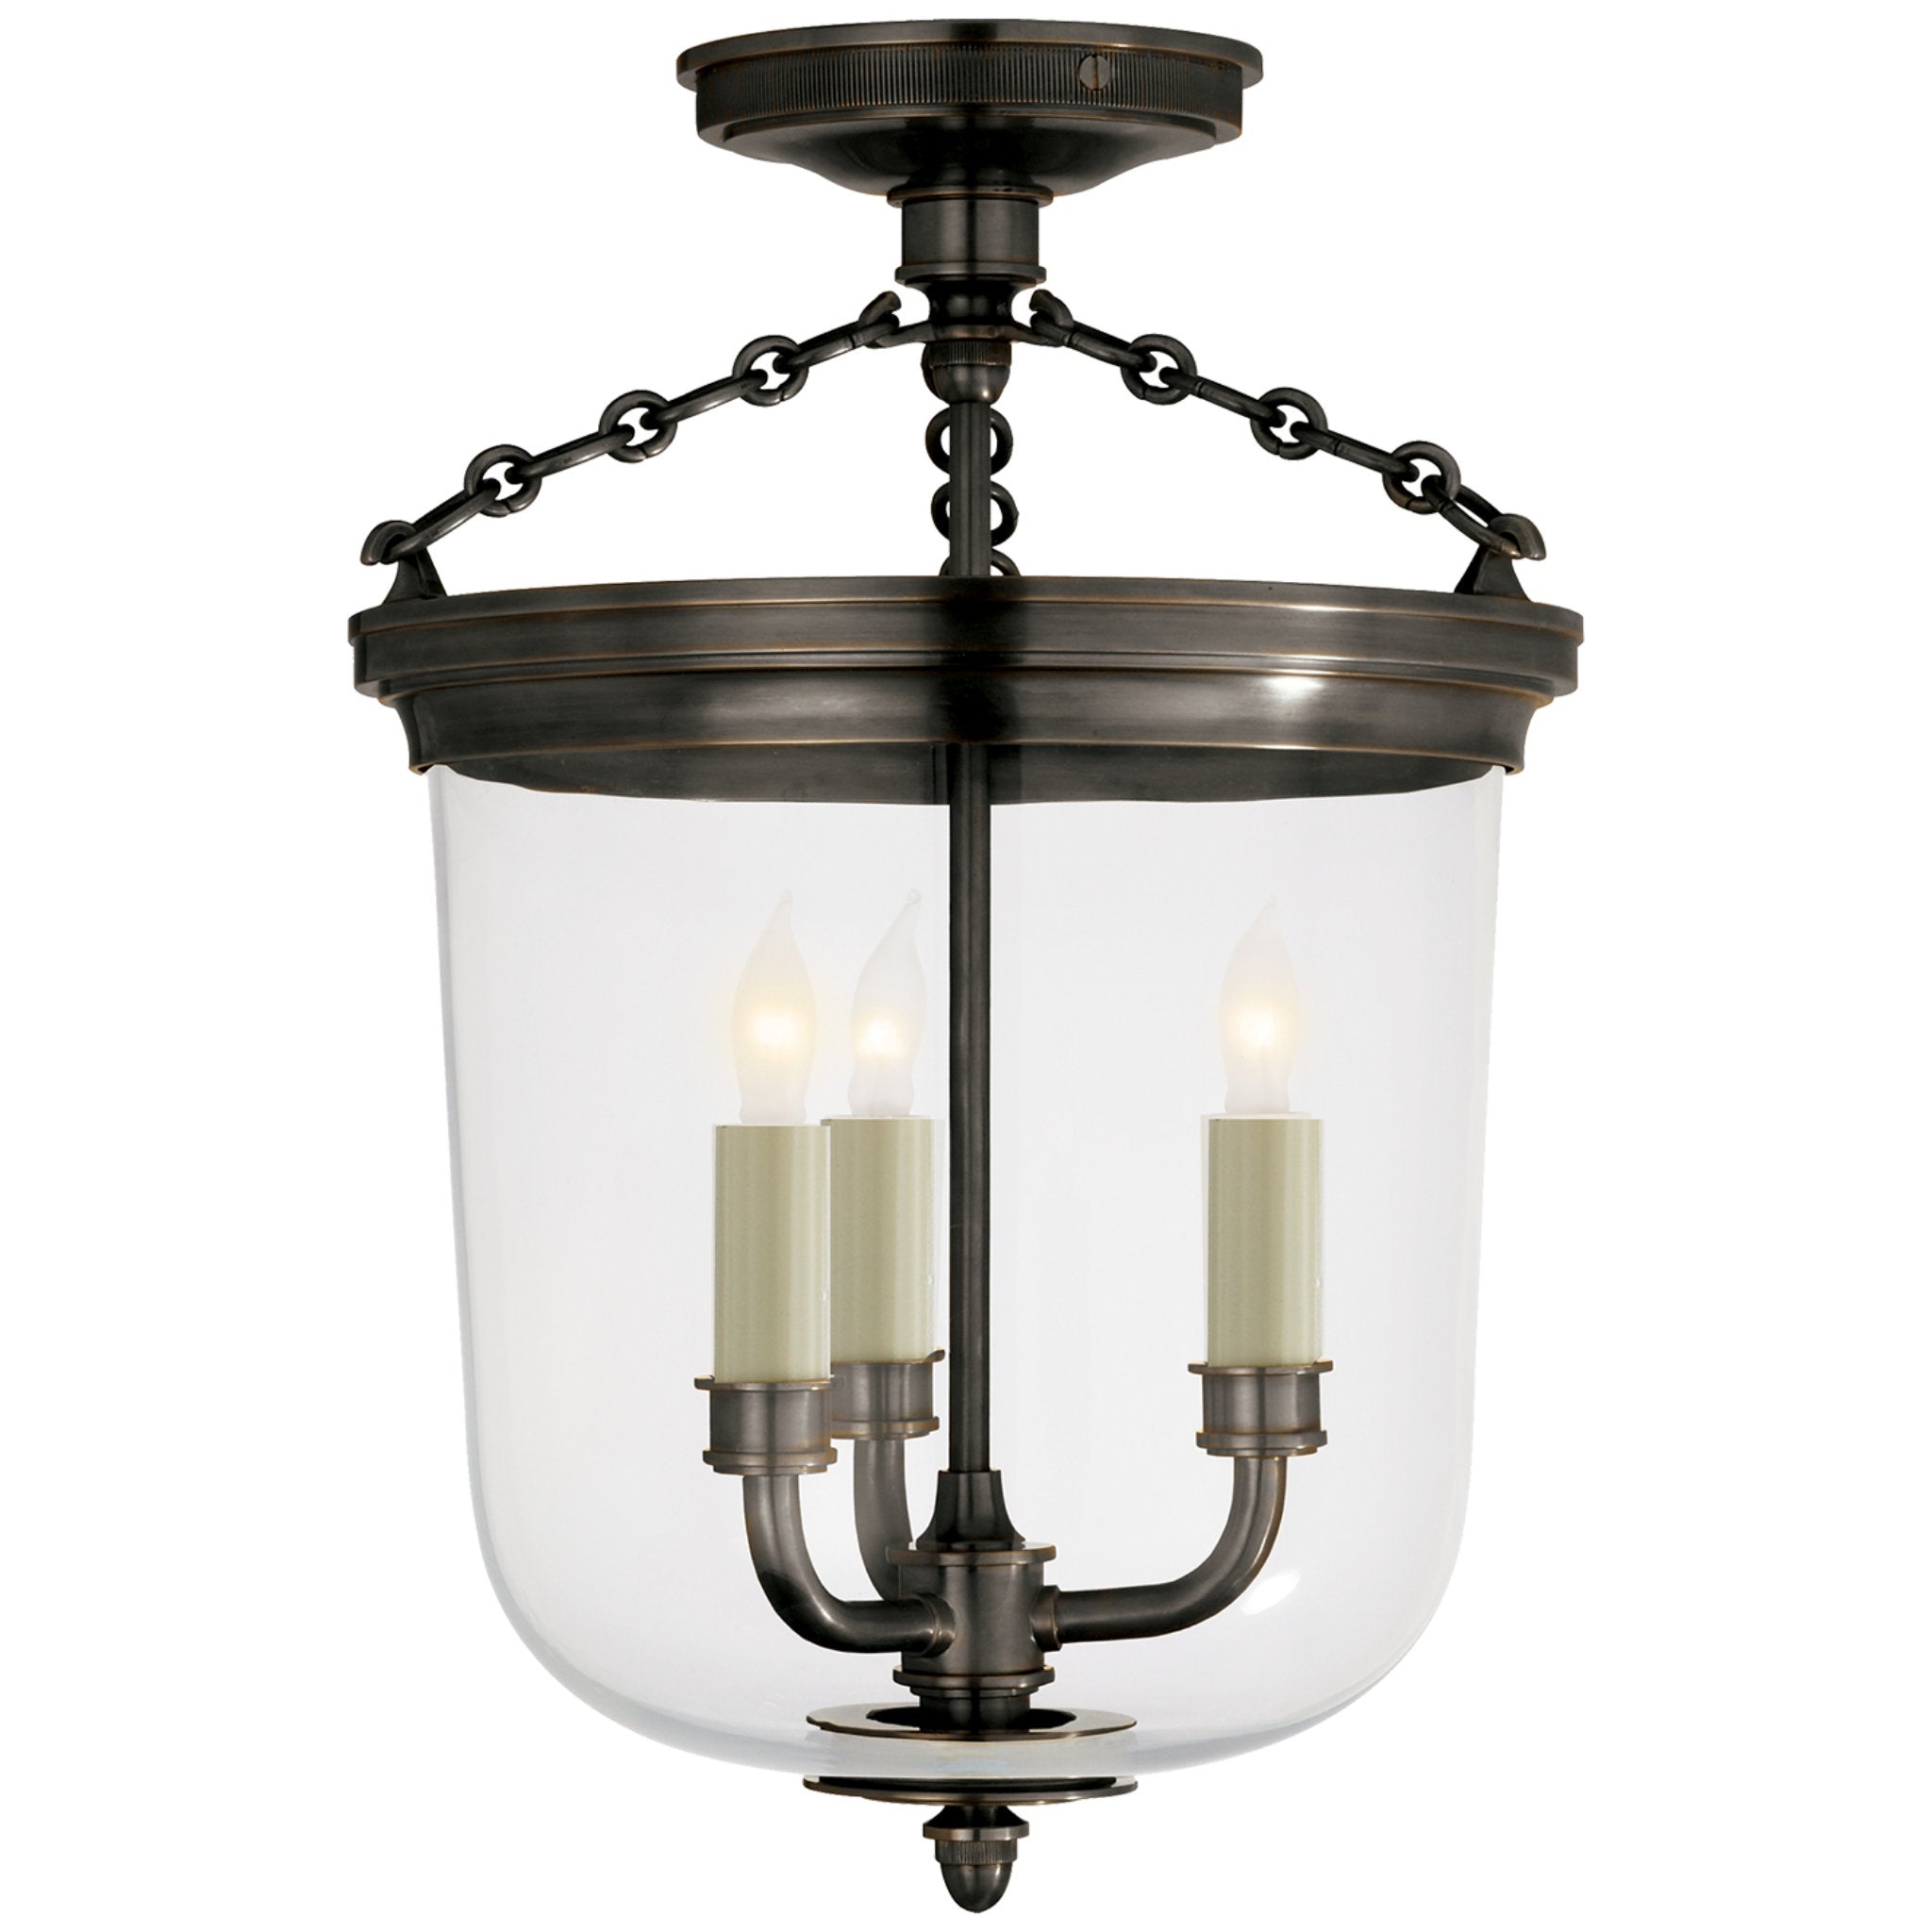 TOB4131HABWG by Visual Comfort - Tilden Large Flush Mount in Hand-Rubbed  Antique Brass with White Glass